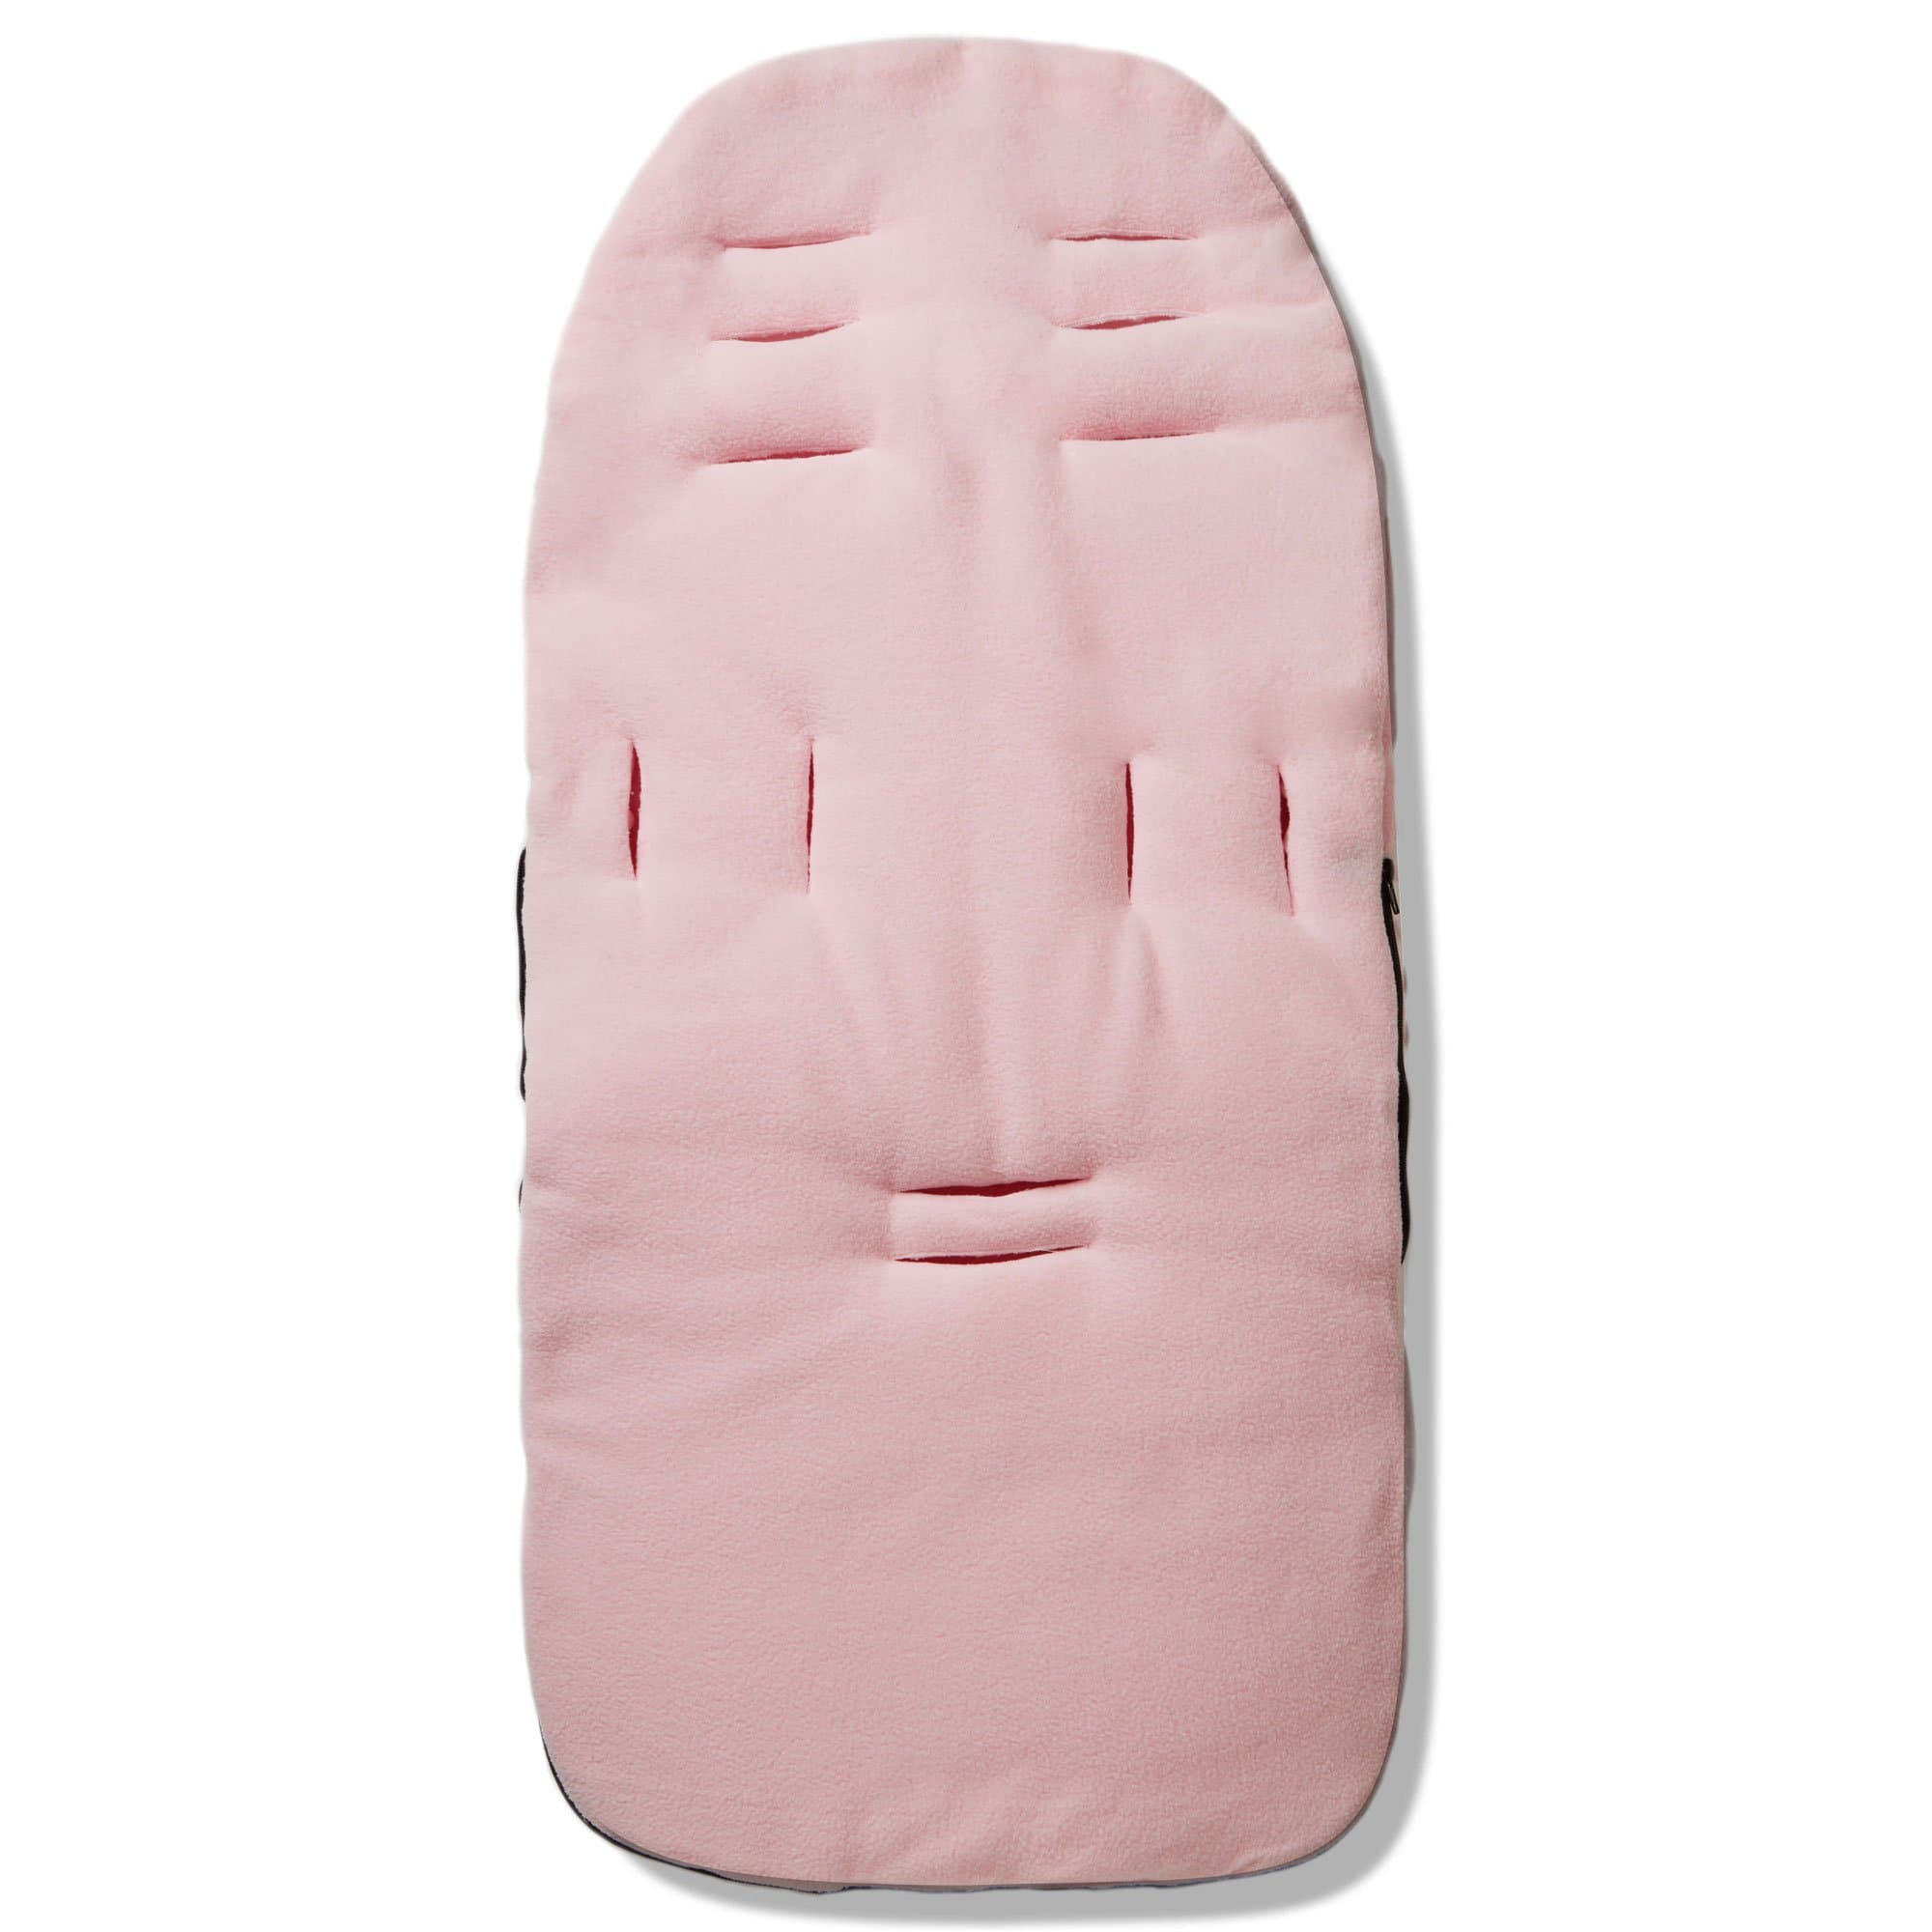 Dimple Footmuff / Cosy Toes Compatible with Egg - For Your Little One